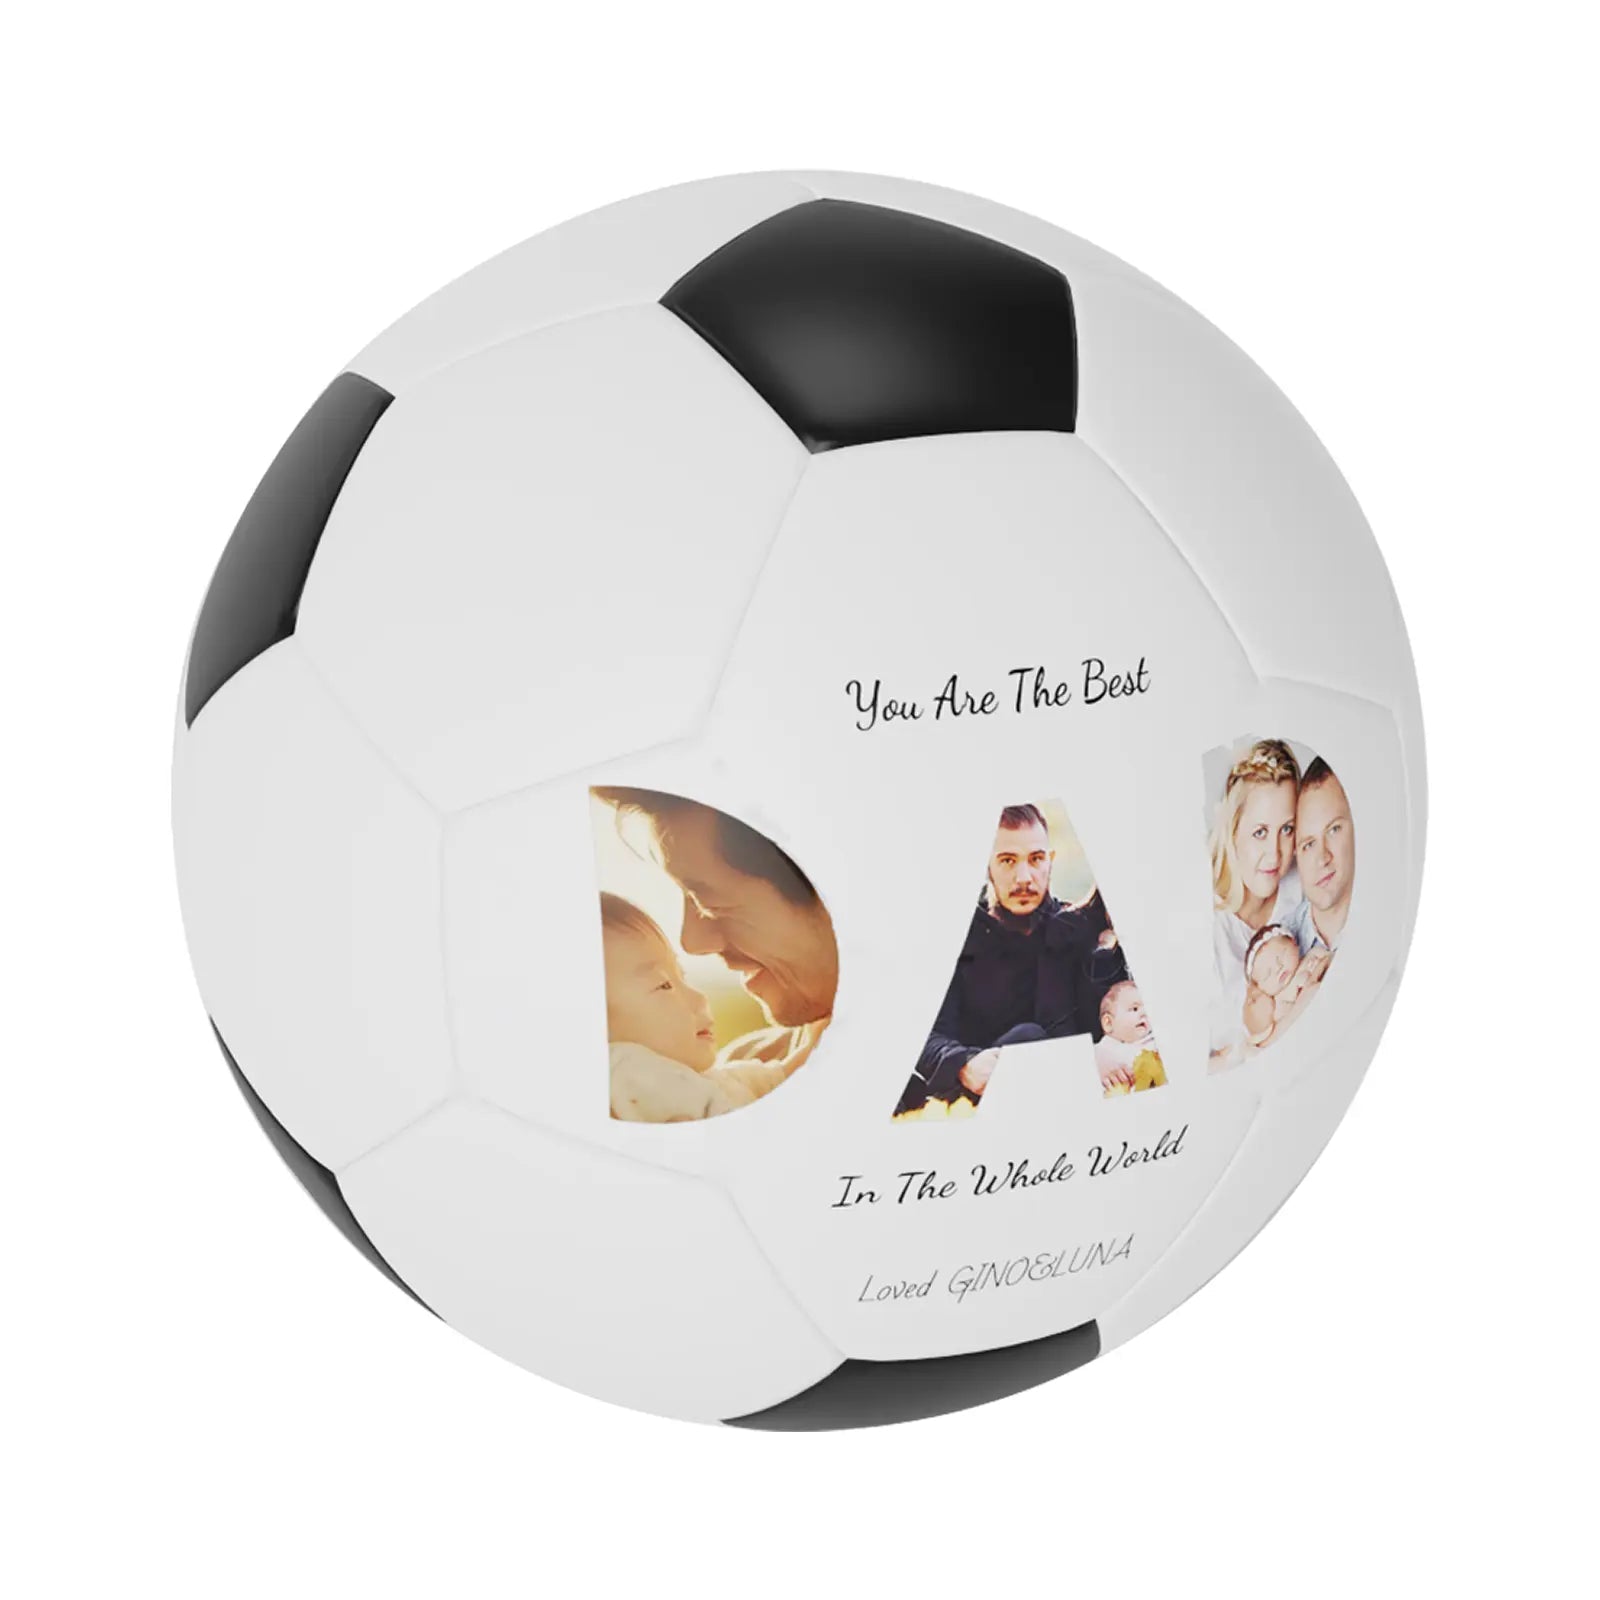 Personalized Custom Father's Day Gift Soccer Ball For Dad - Family Watchs